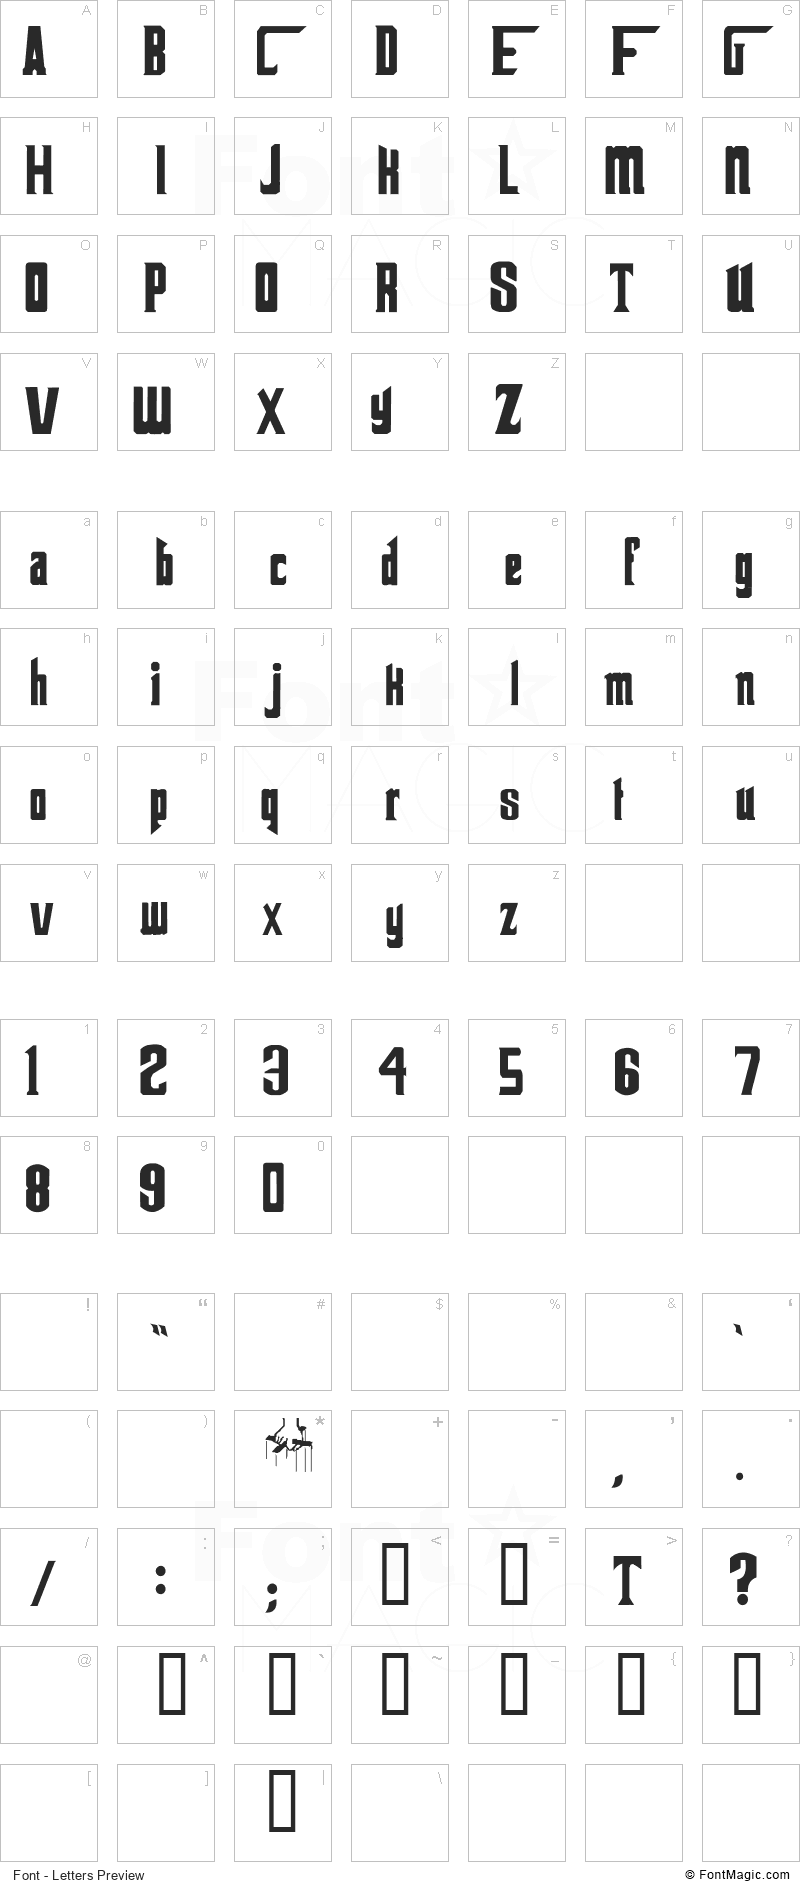 The Godfather Font - All Latters Preview Chart